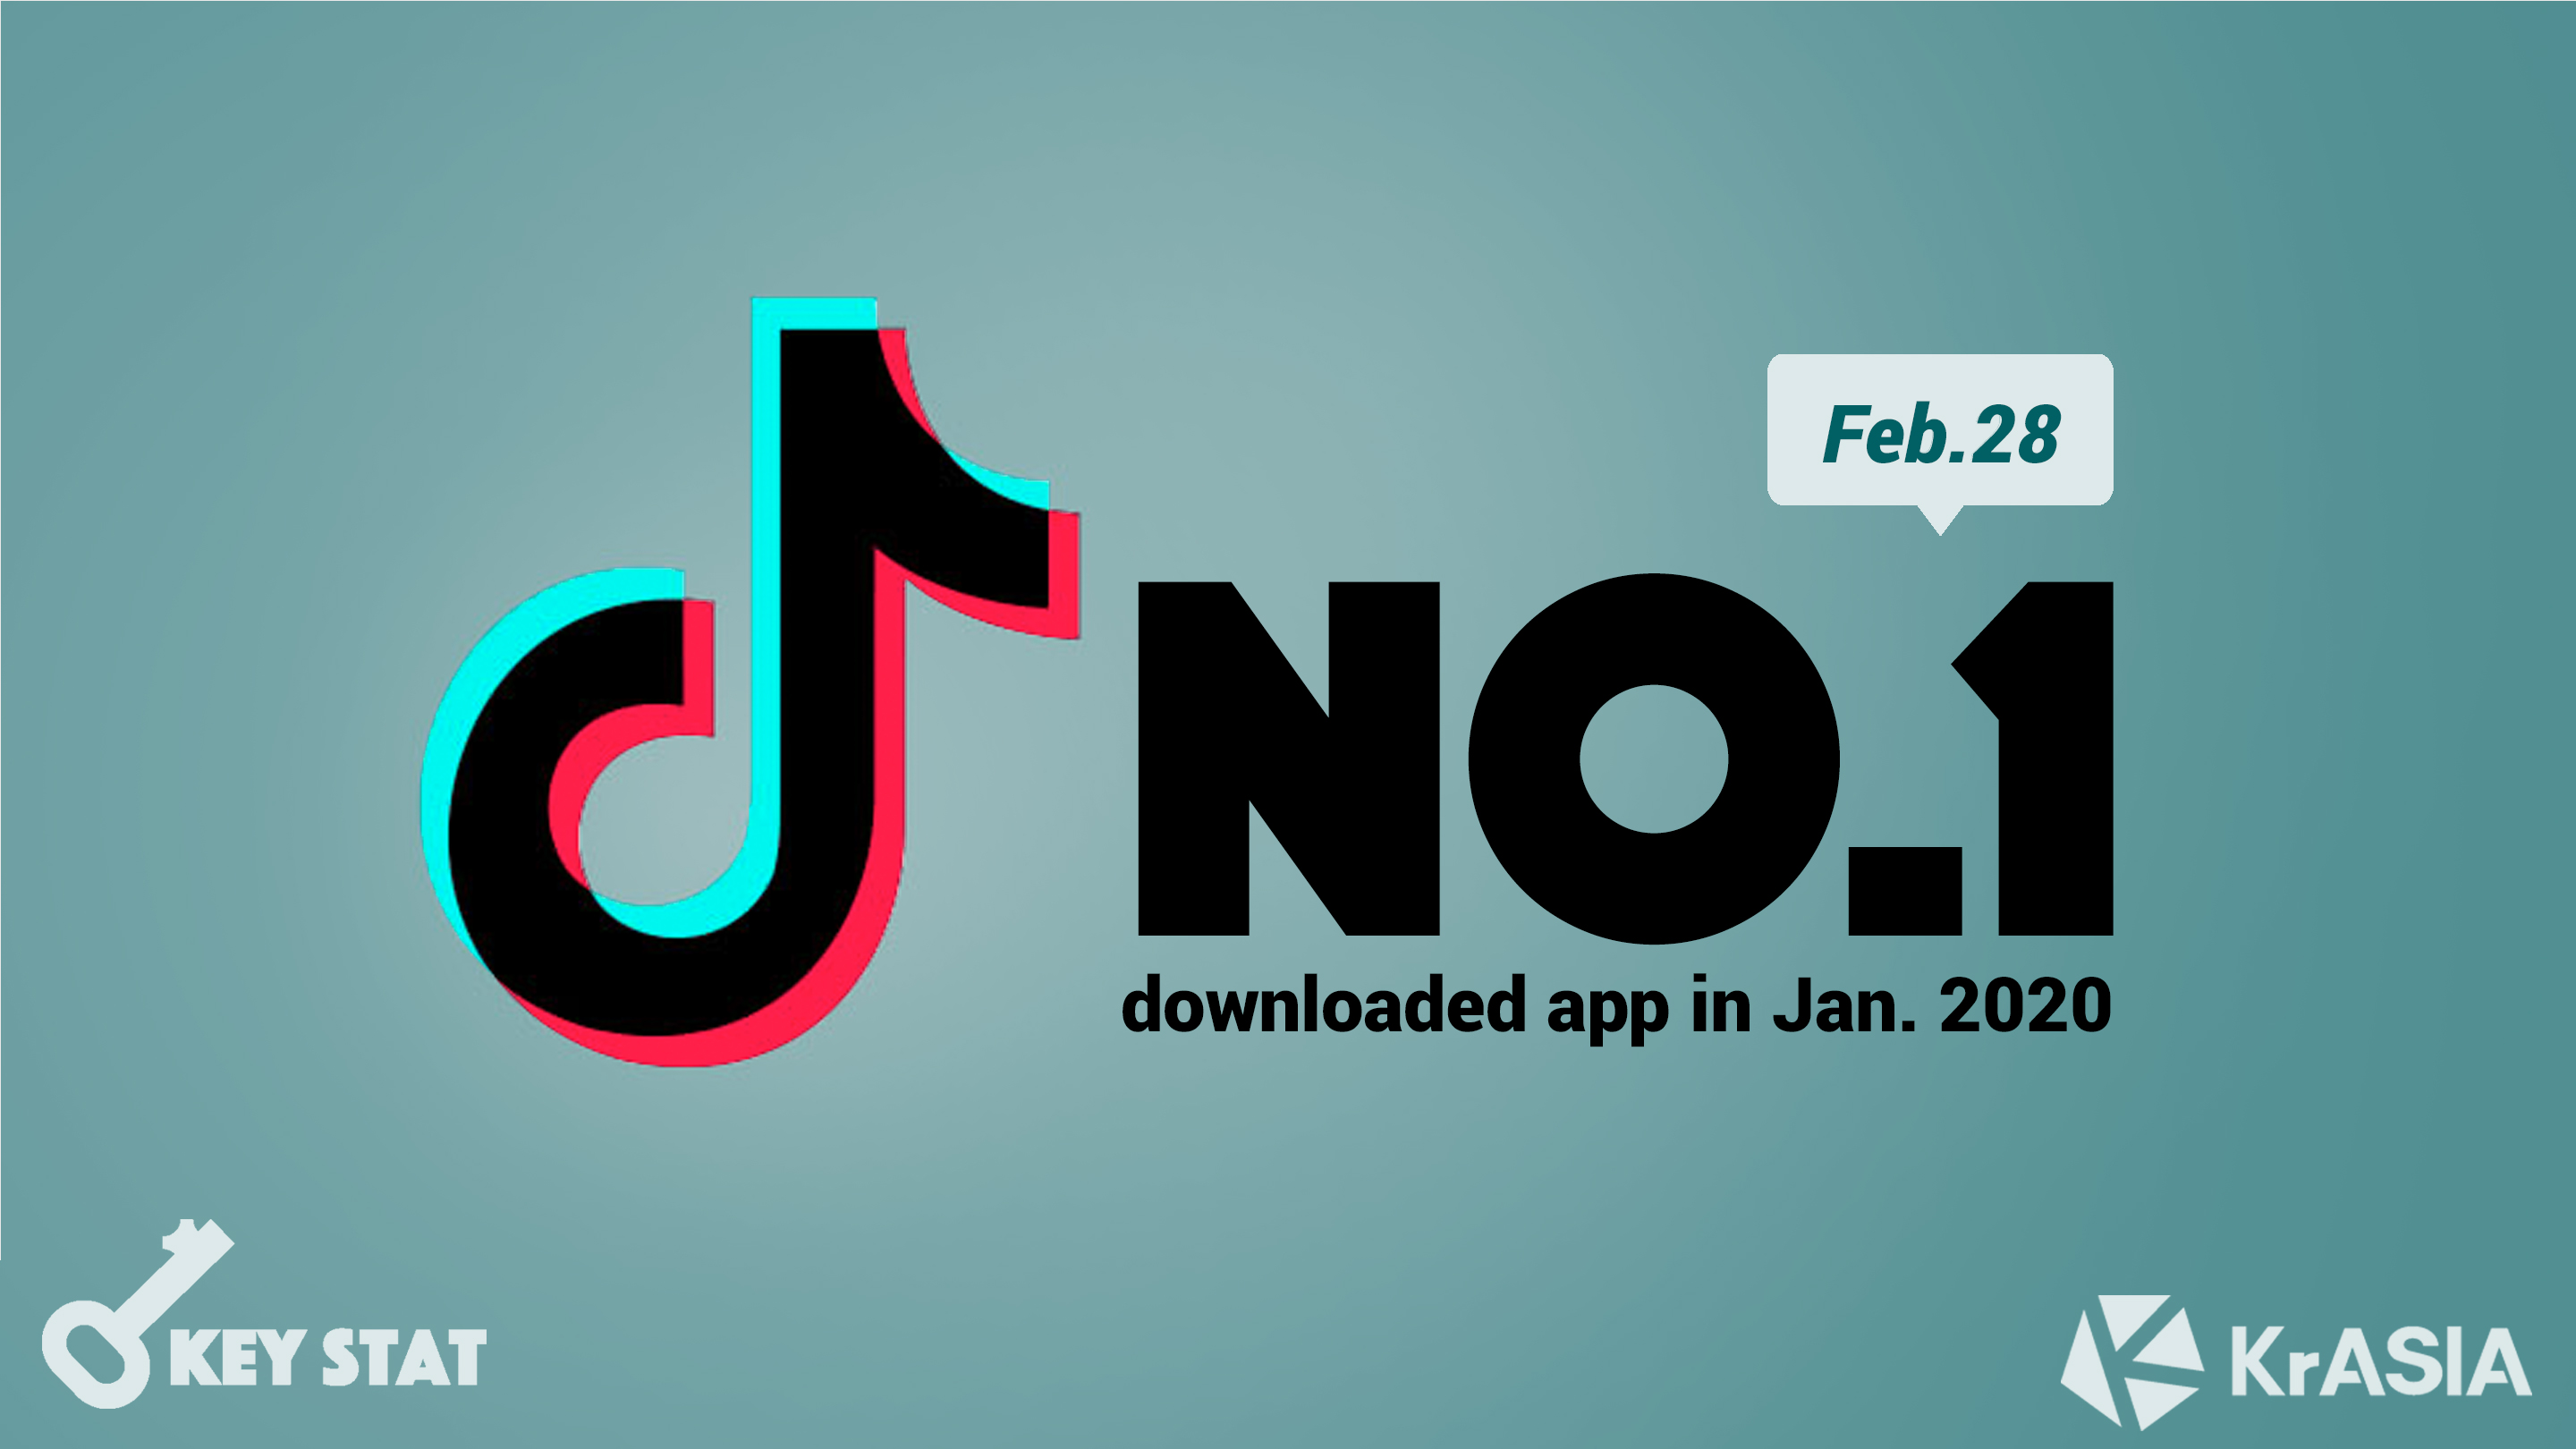 KEY STAT | TikTok surpasses WhatsApp to become the world’s most downloaded app in January